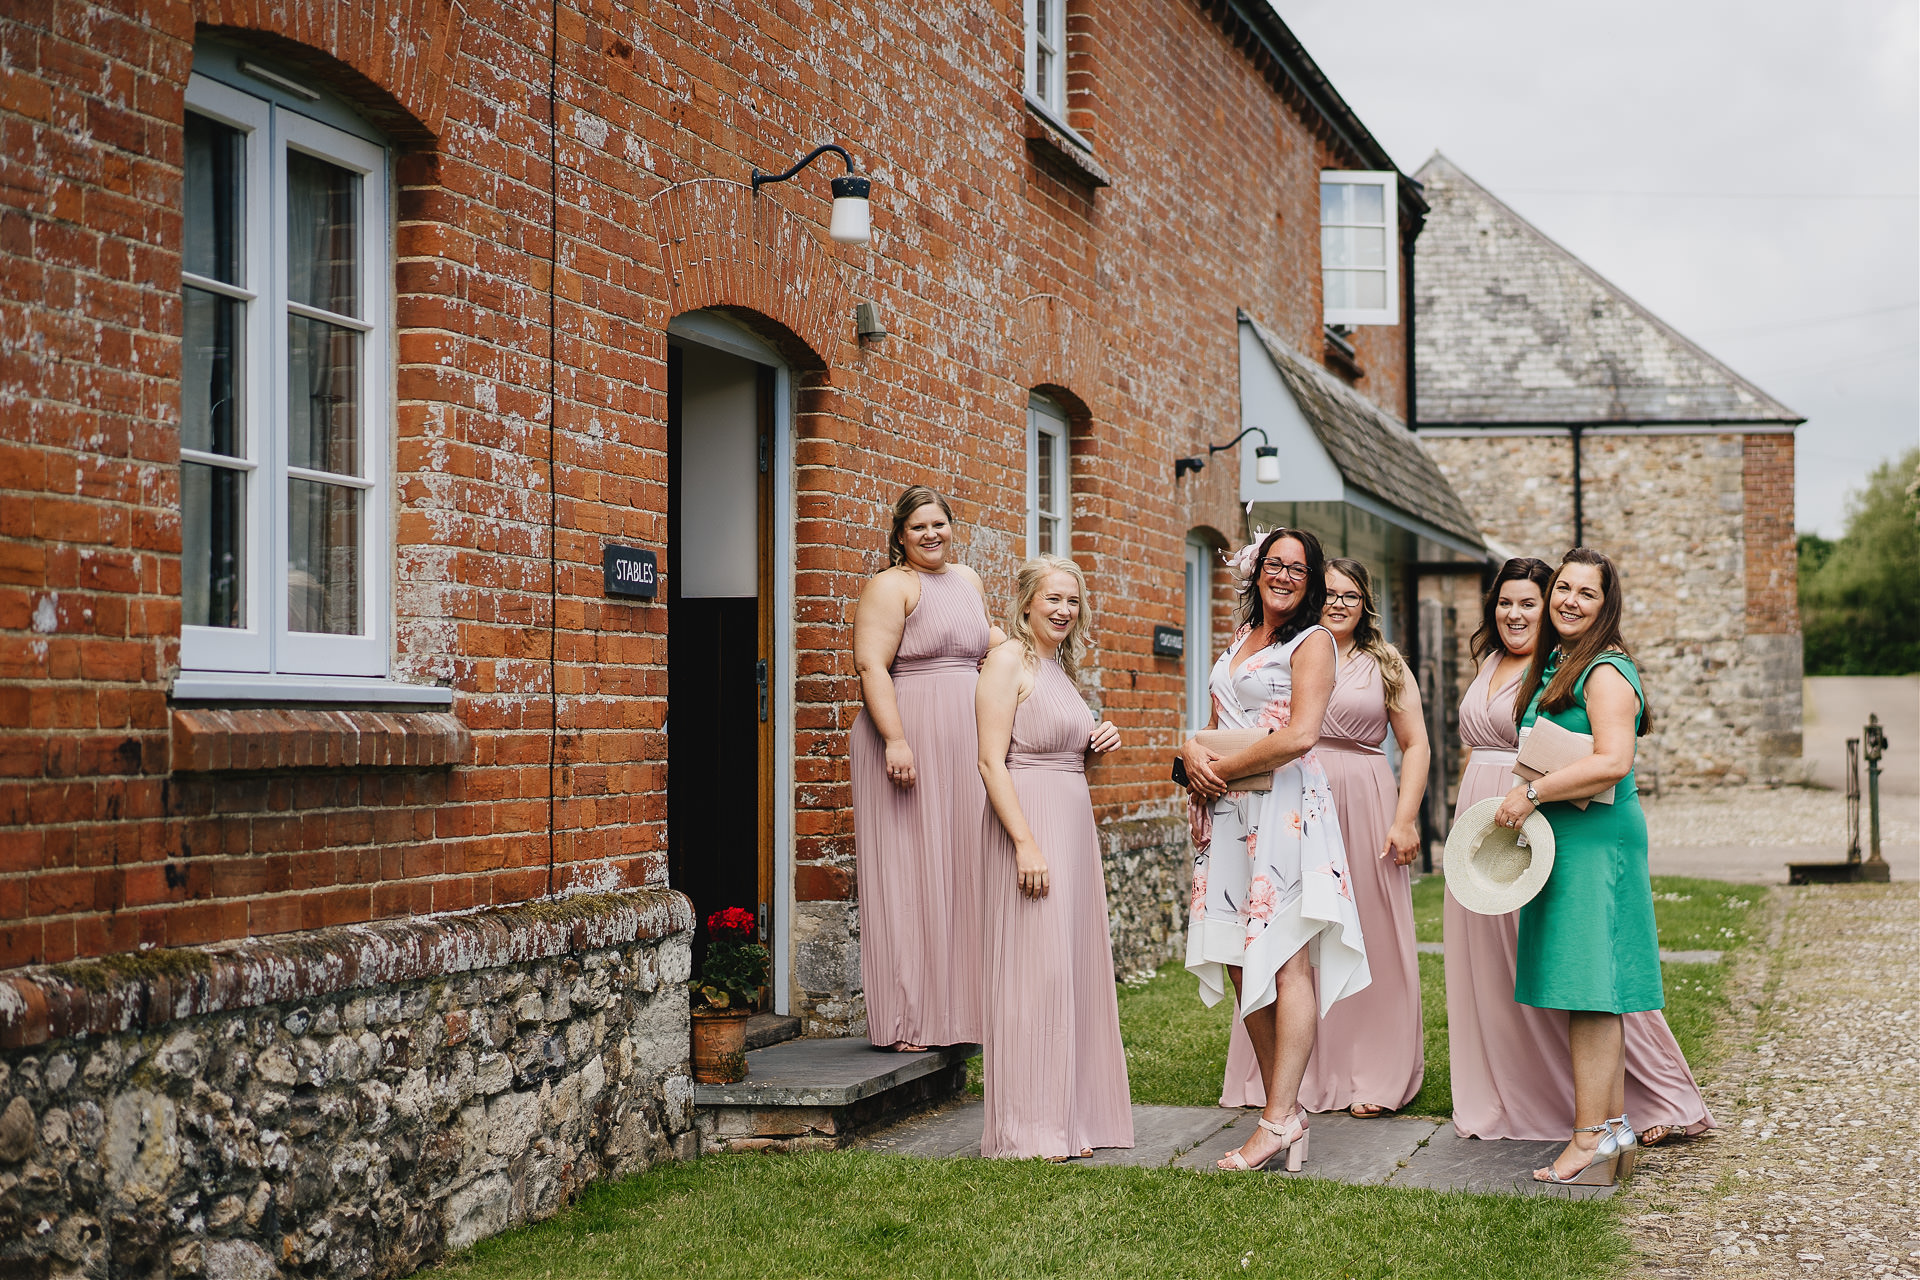 Bridesmaids and mother of the bride waiting outside a rustic building and smiling